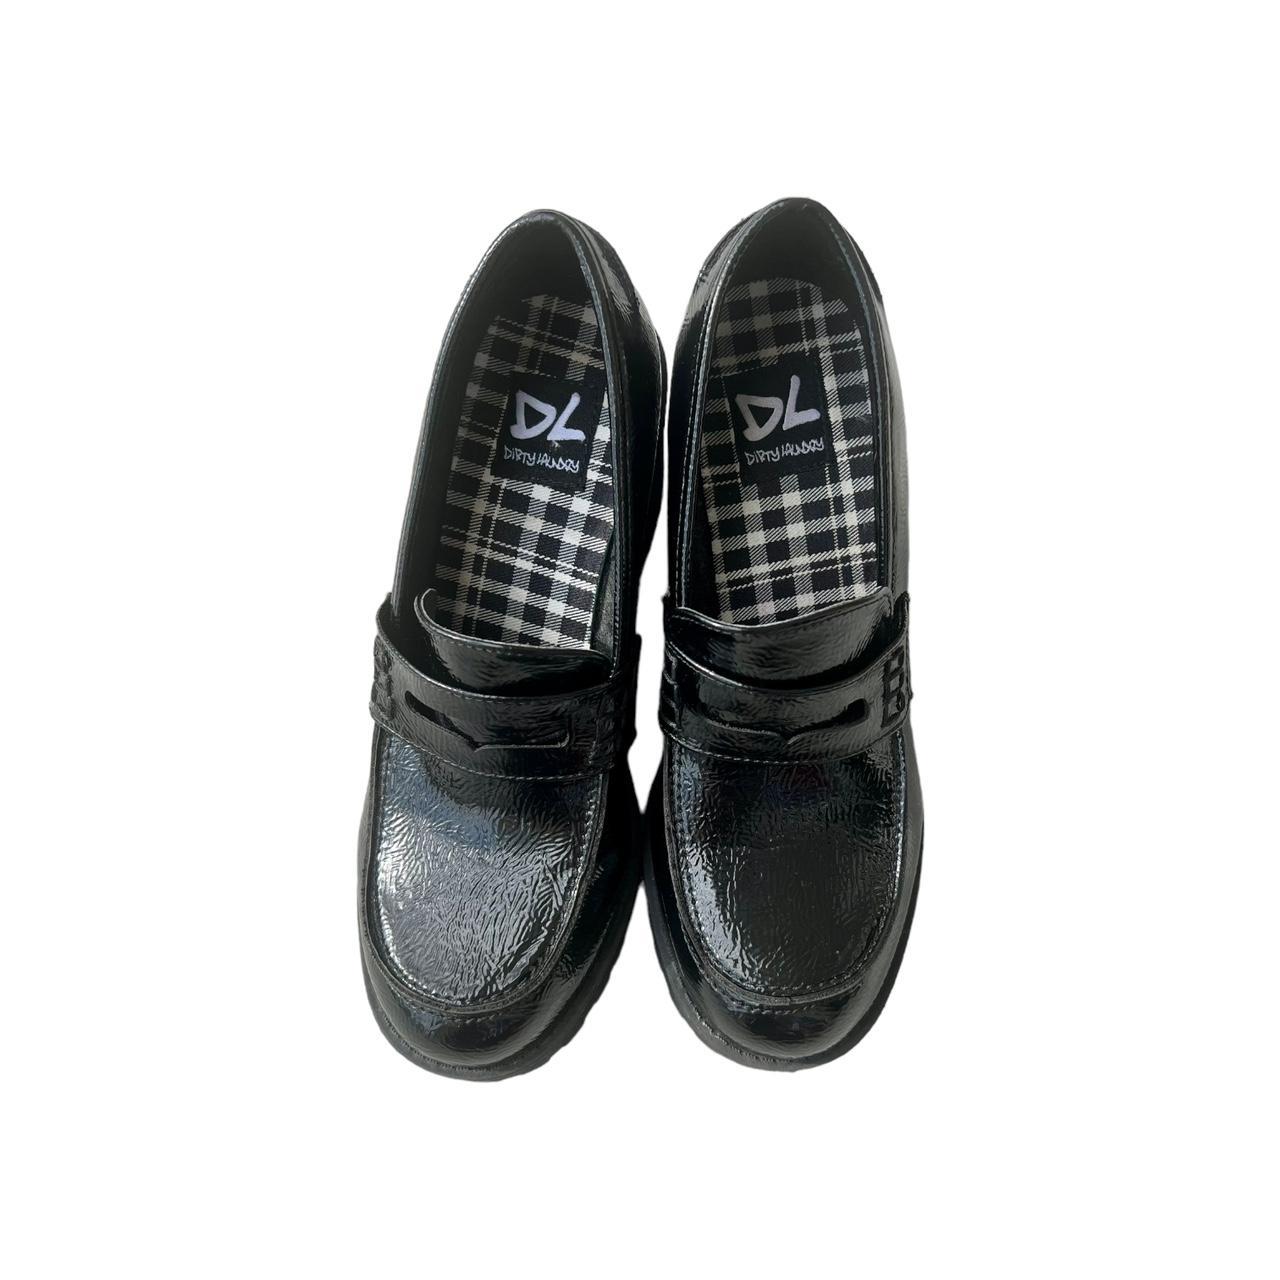 Dirty Laundry Women's Black Loafers (5)